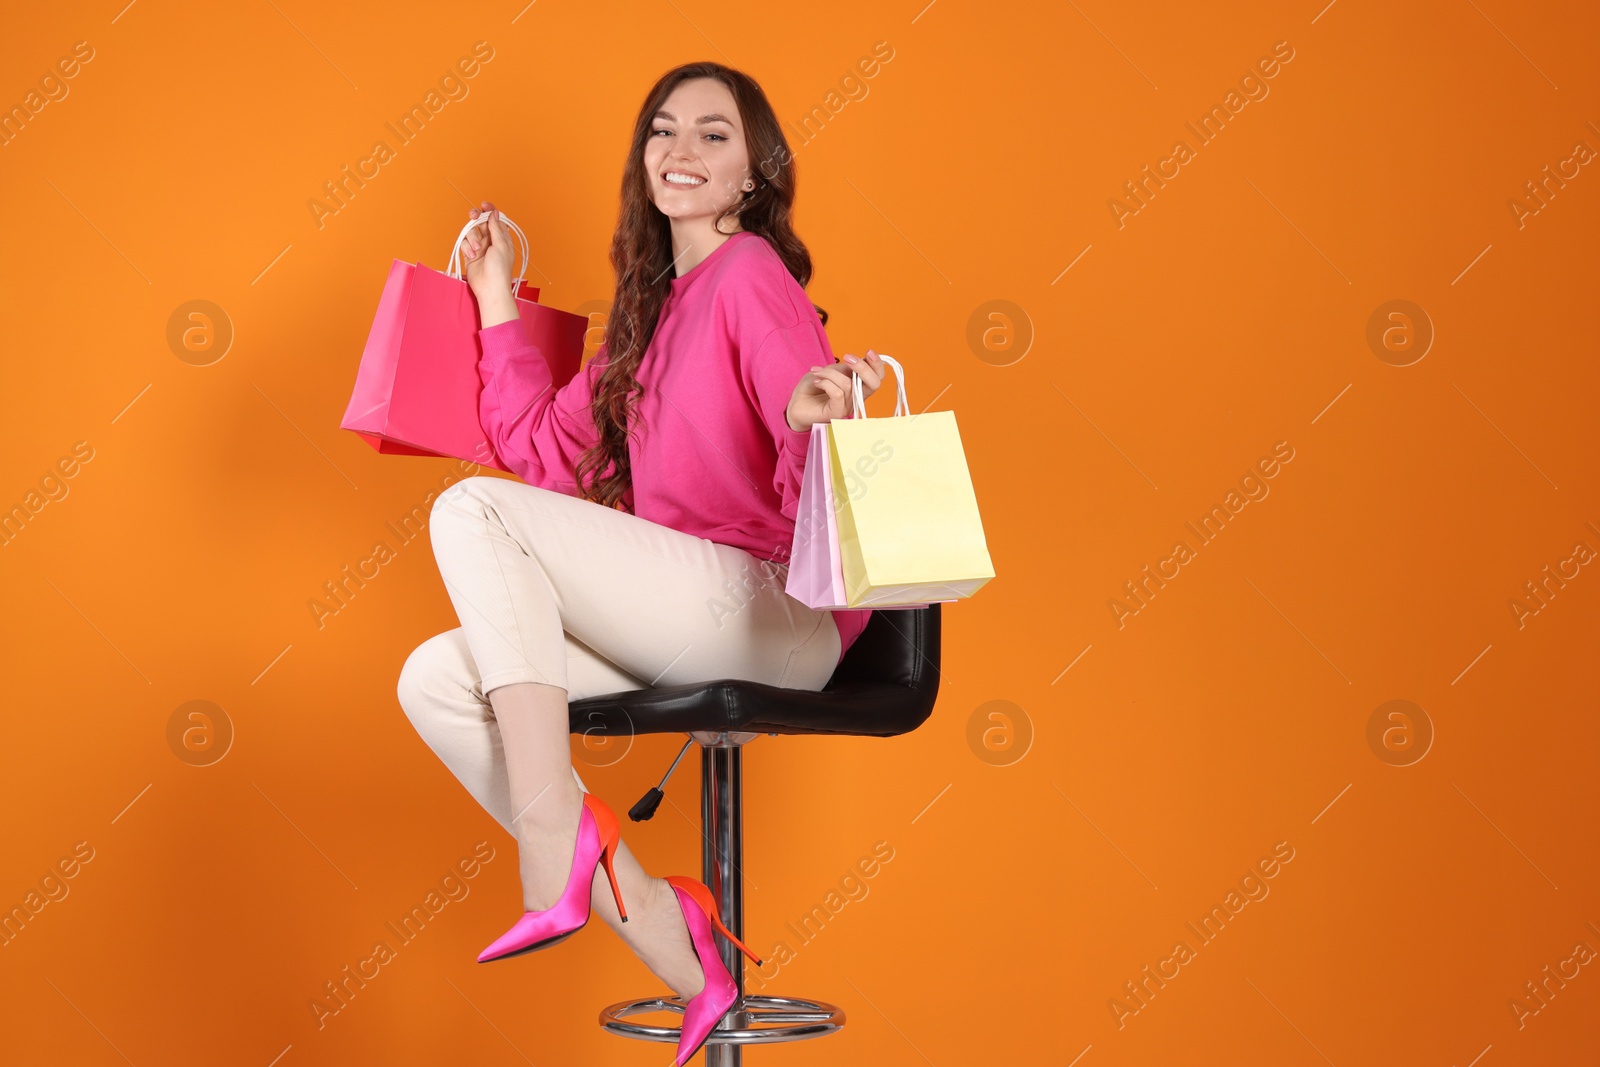 Photo of Happy woman holding colorful shopping bags on chair against orange background